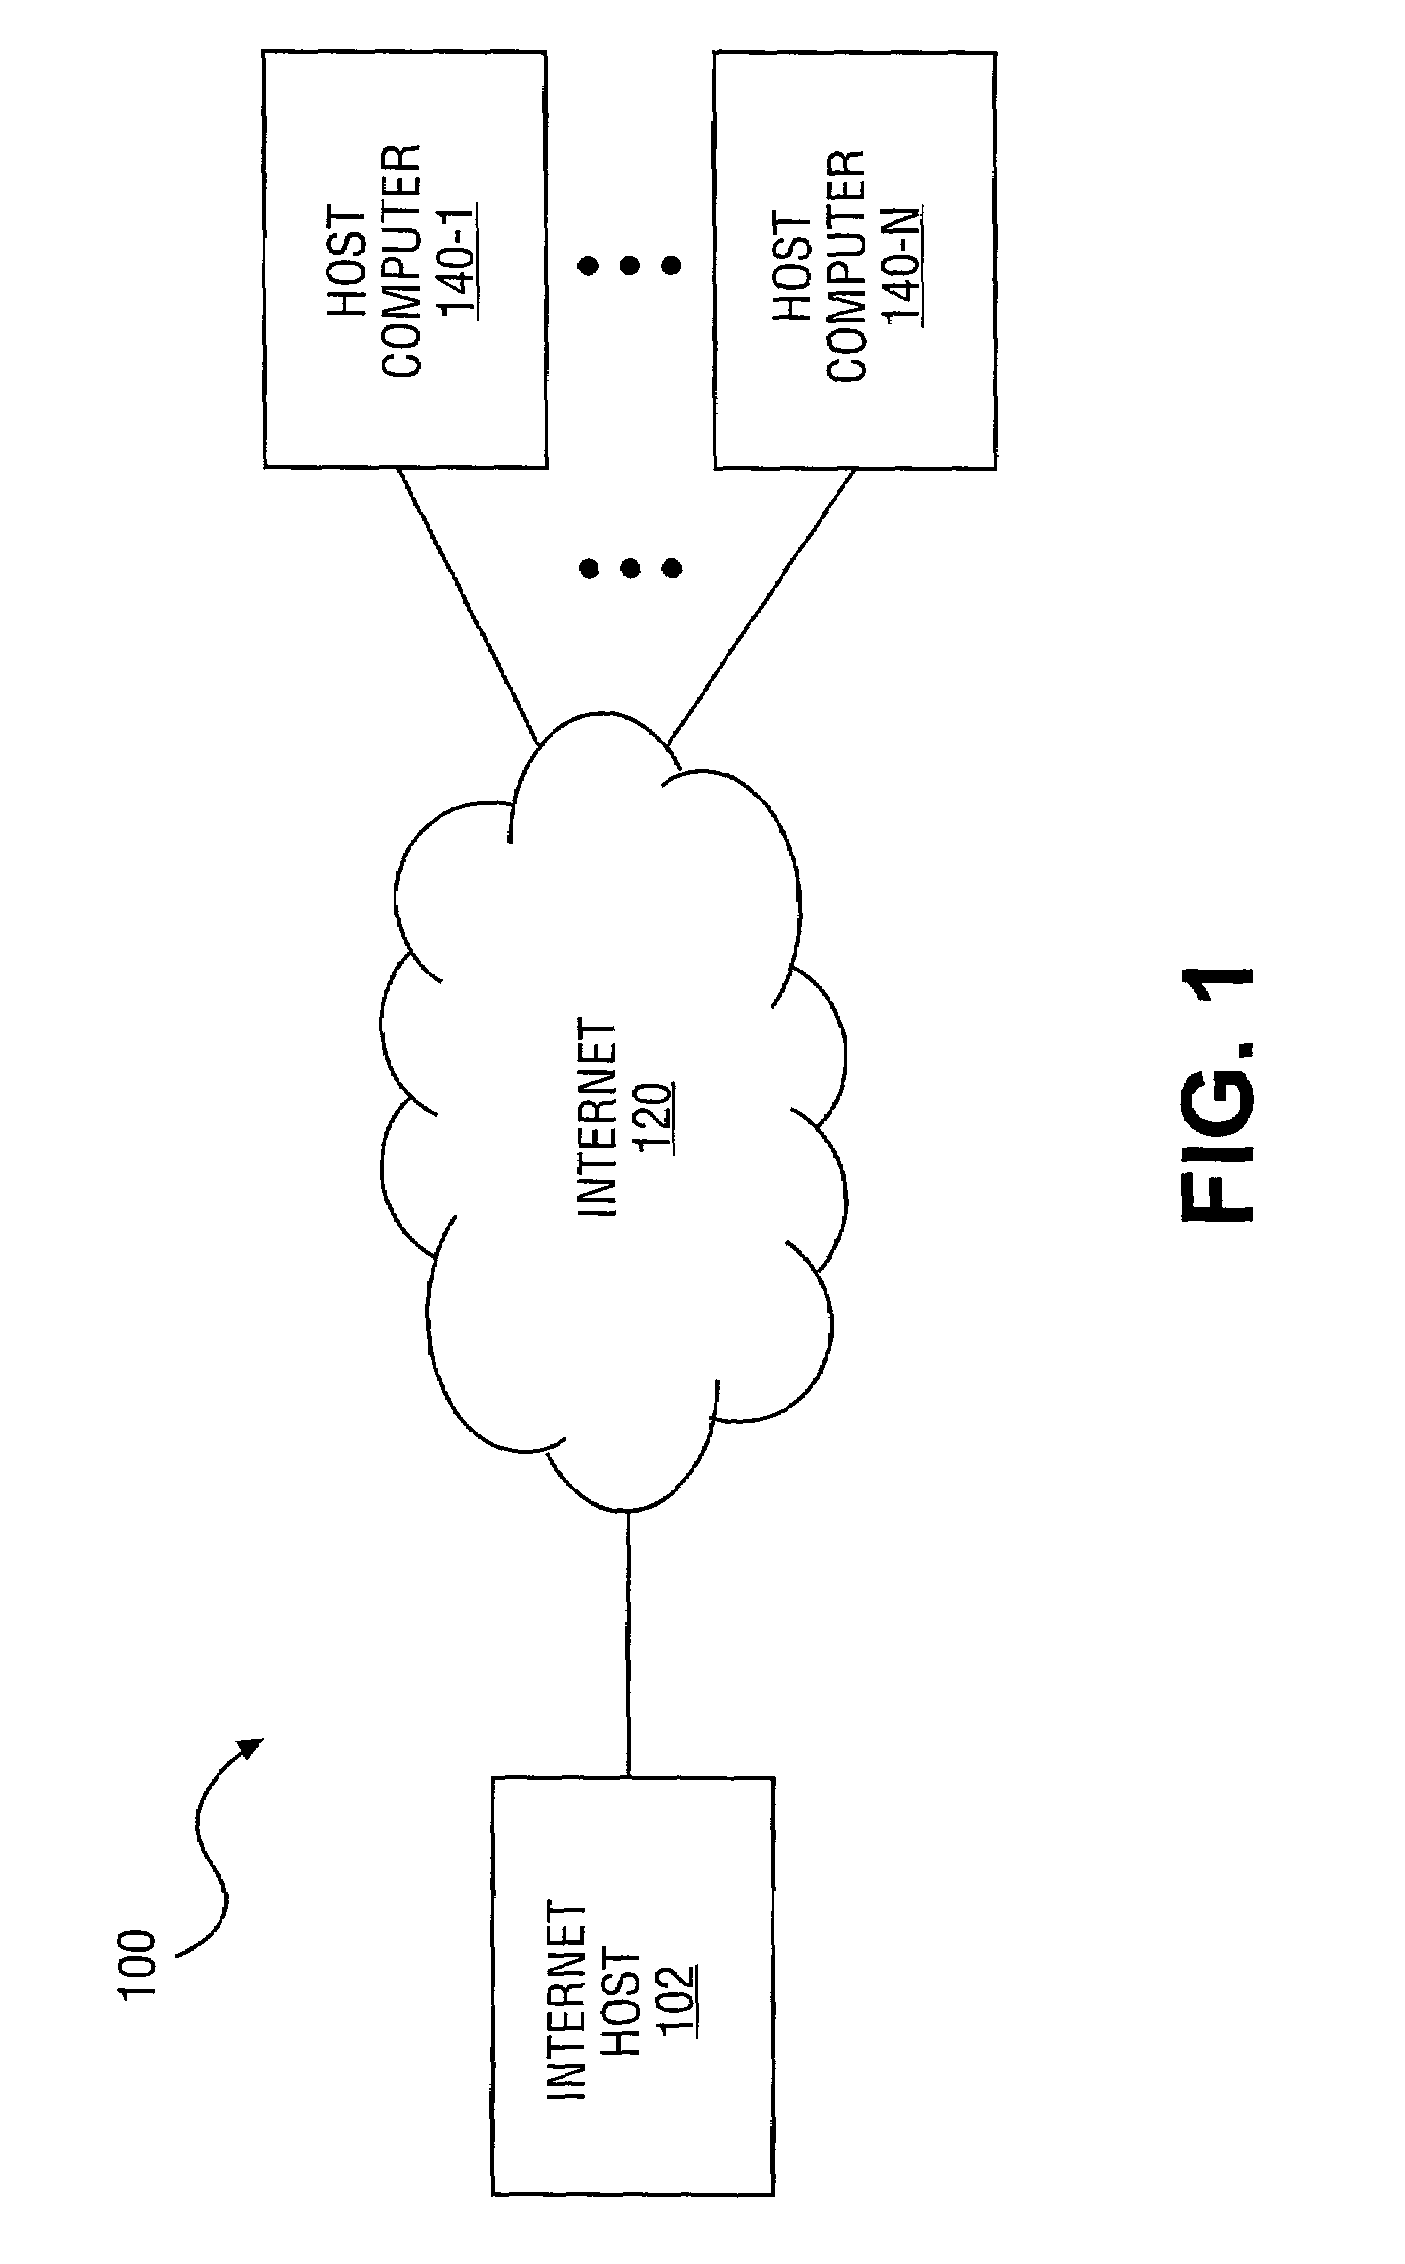 Apparatus and method for secure, automated response to distributed denial of service attacks